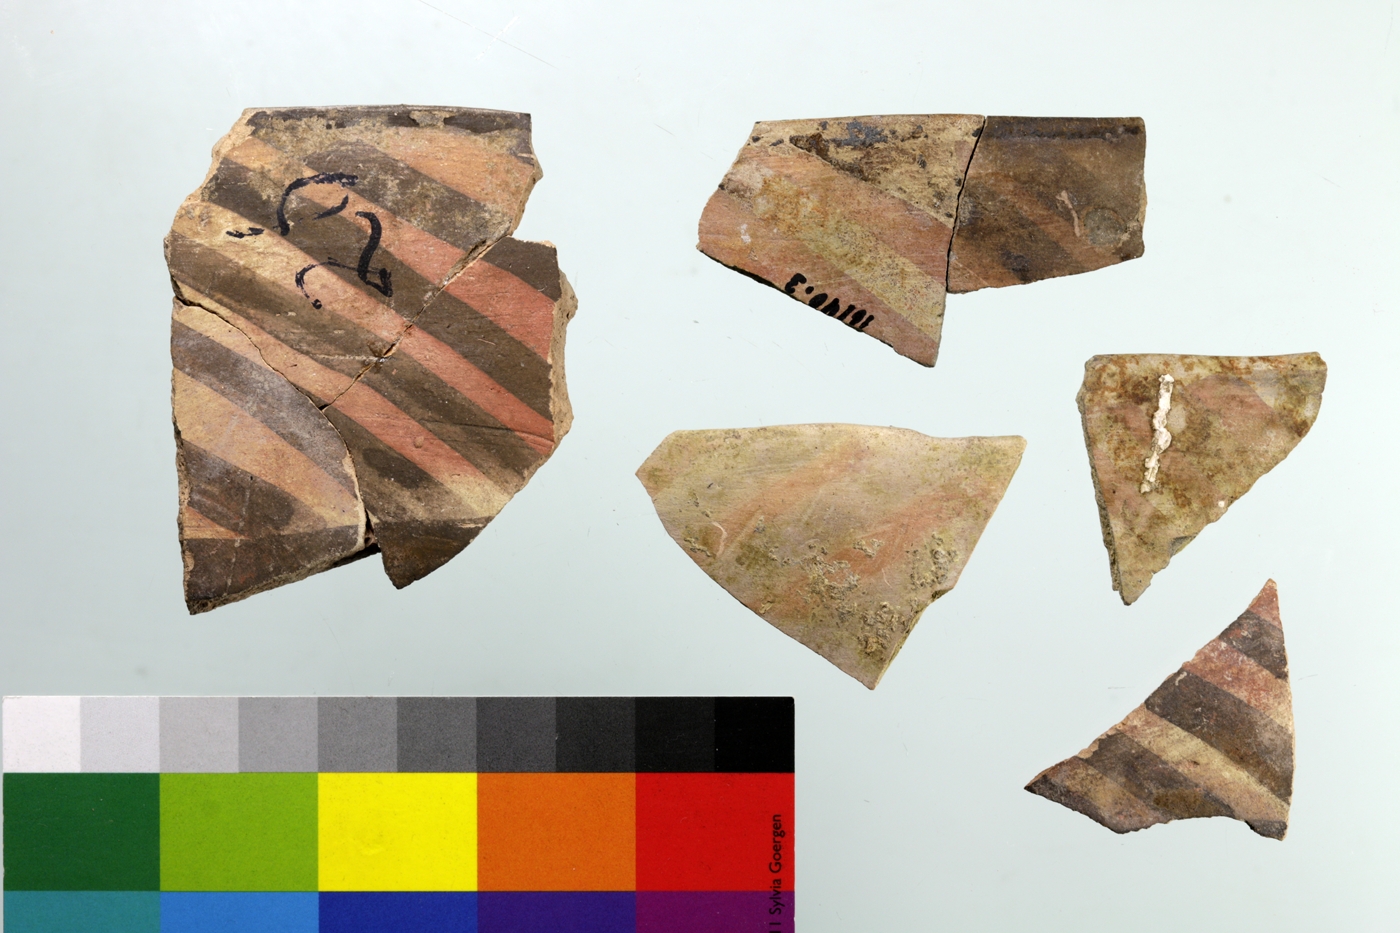 Meana Black on Red sherds painted with oblique stripes. The lighter colors are the result of overfiring.